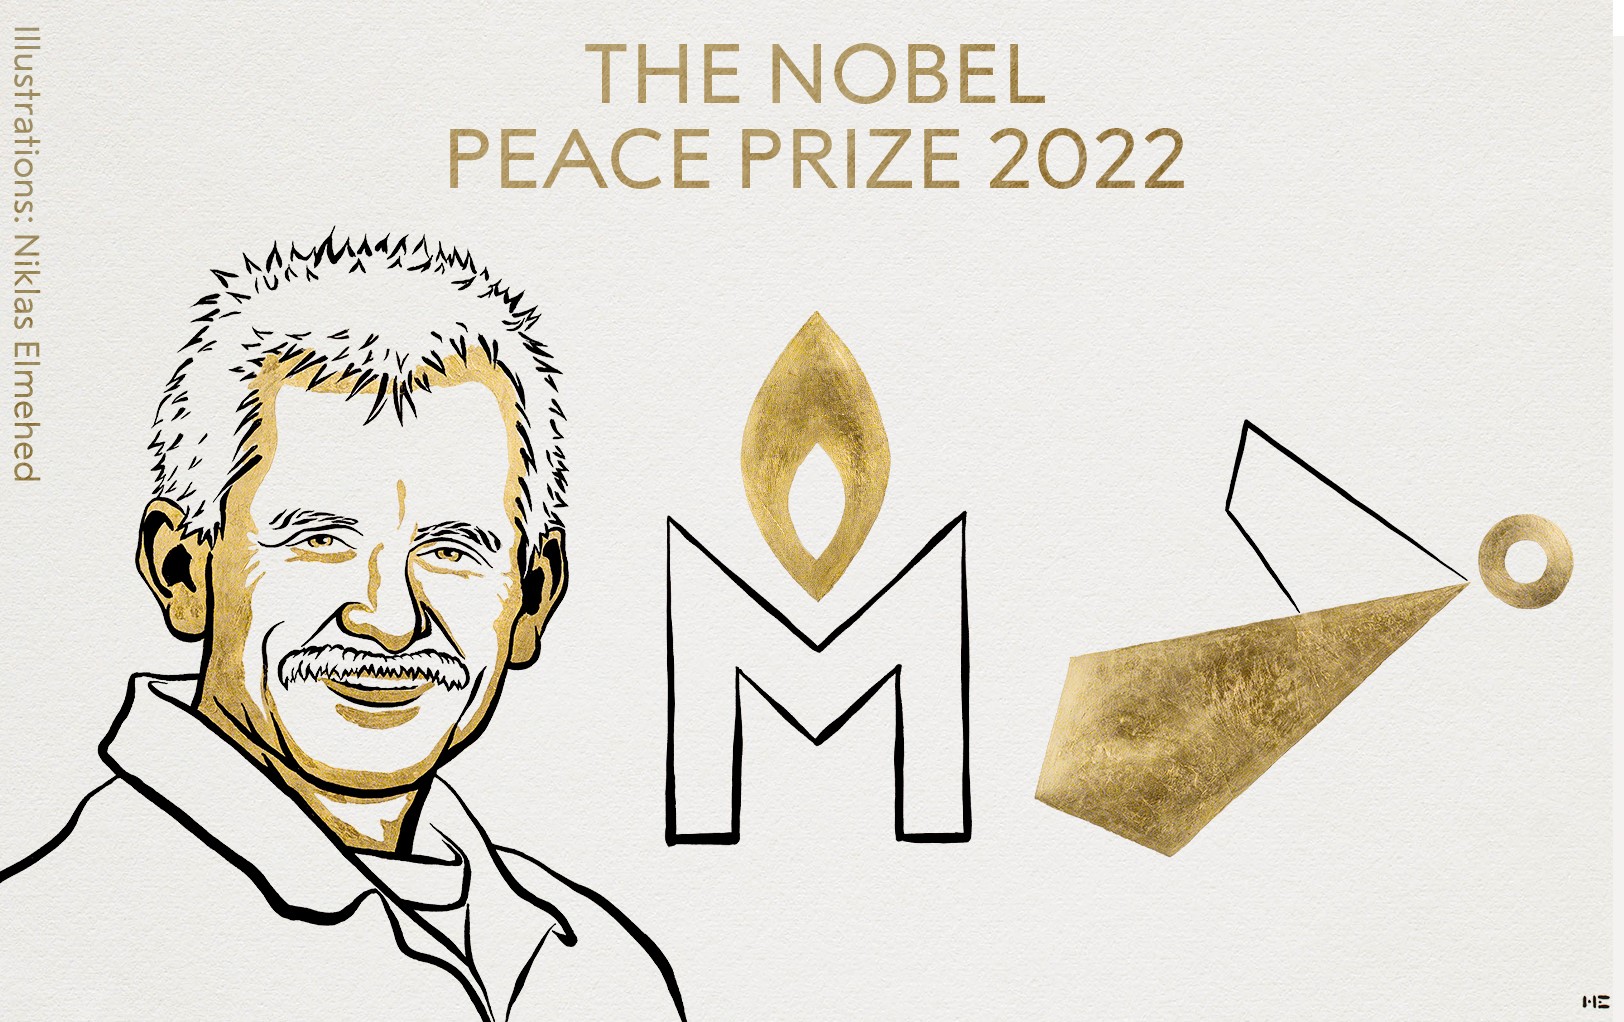 Representatives of the three initiatives awarded the Nobel Peace Prize 2022 visit Barcelona and Madrid